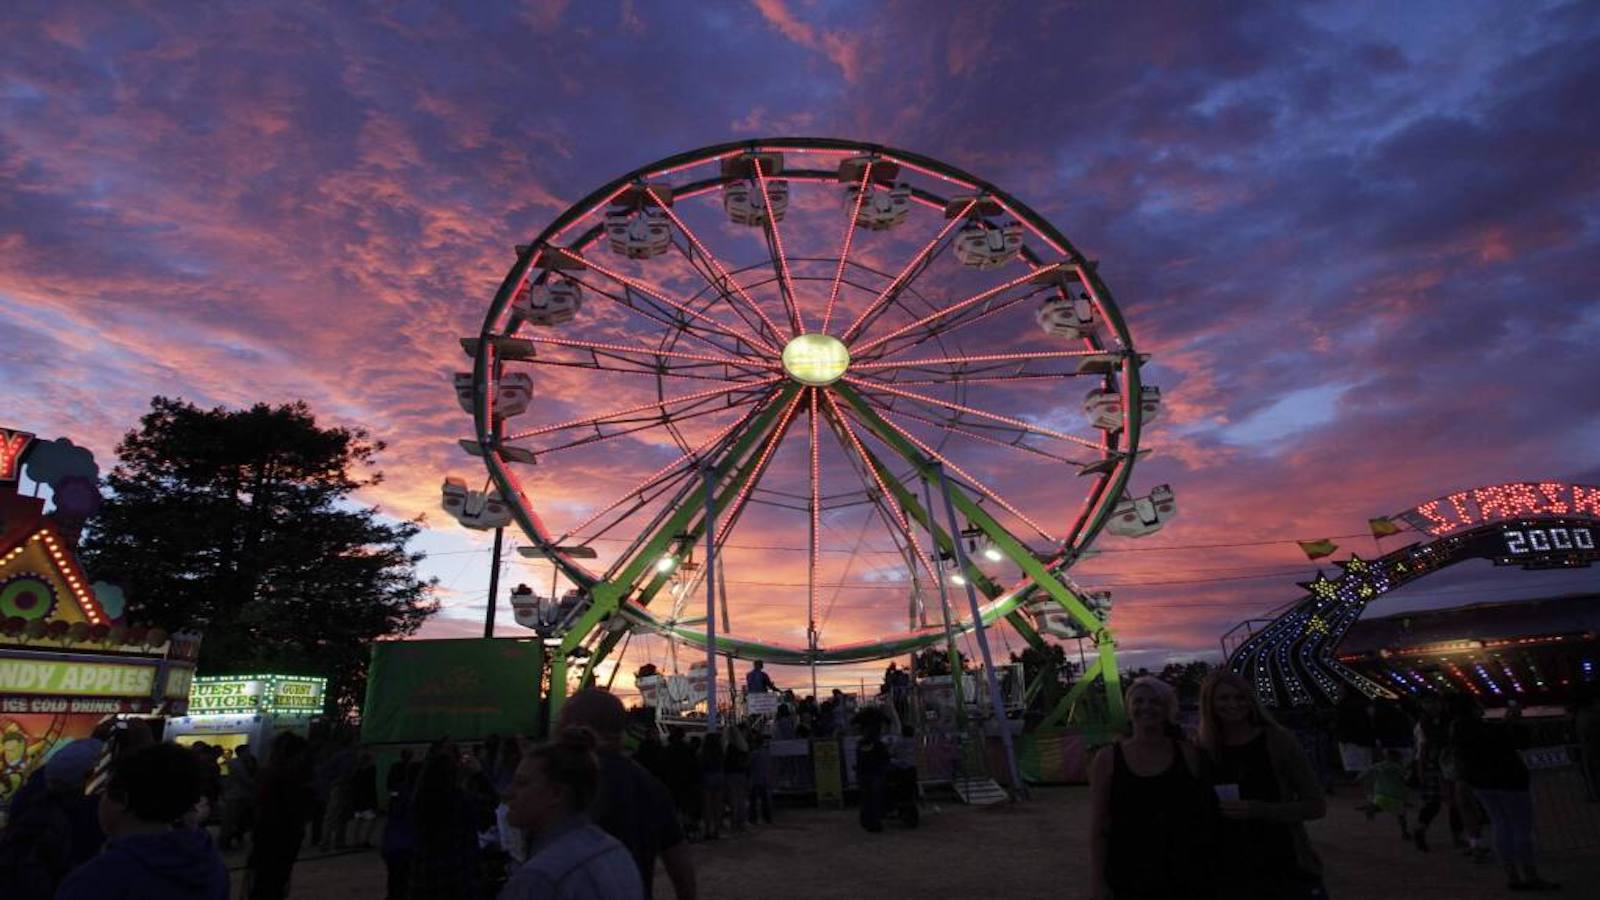 Ferris wheel at Sonoma Marin Fair lit up by sunset and pink clouds